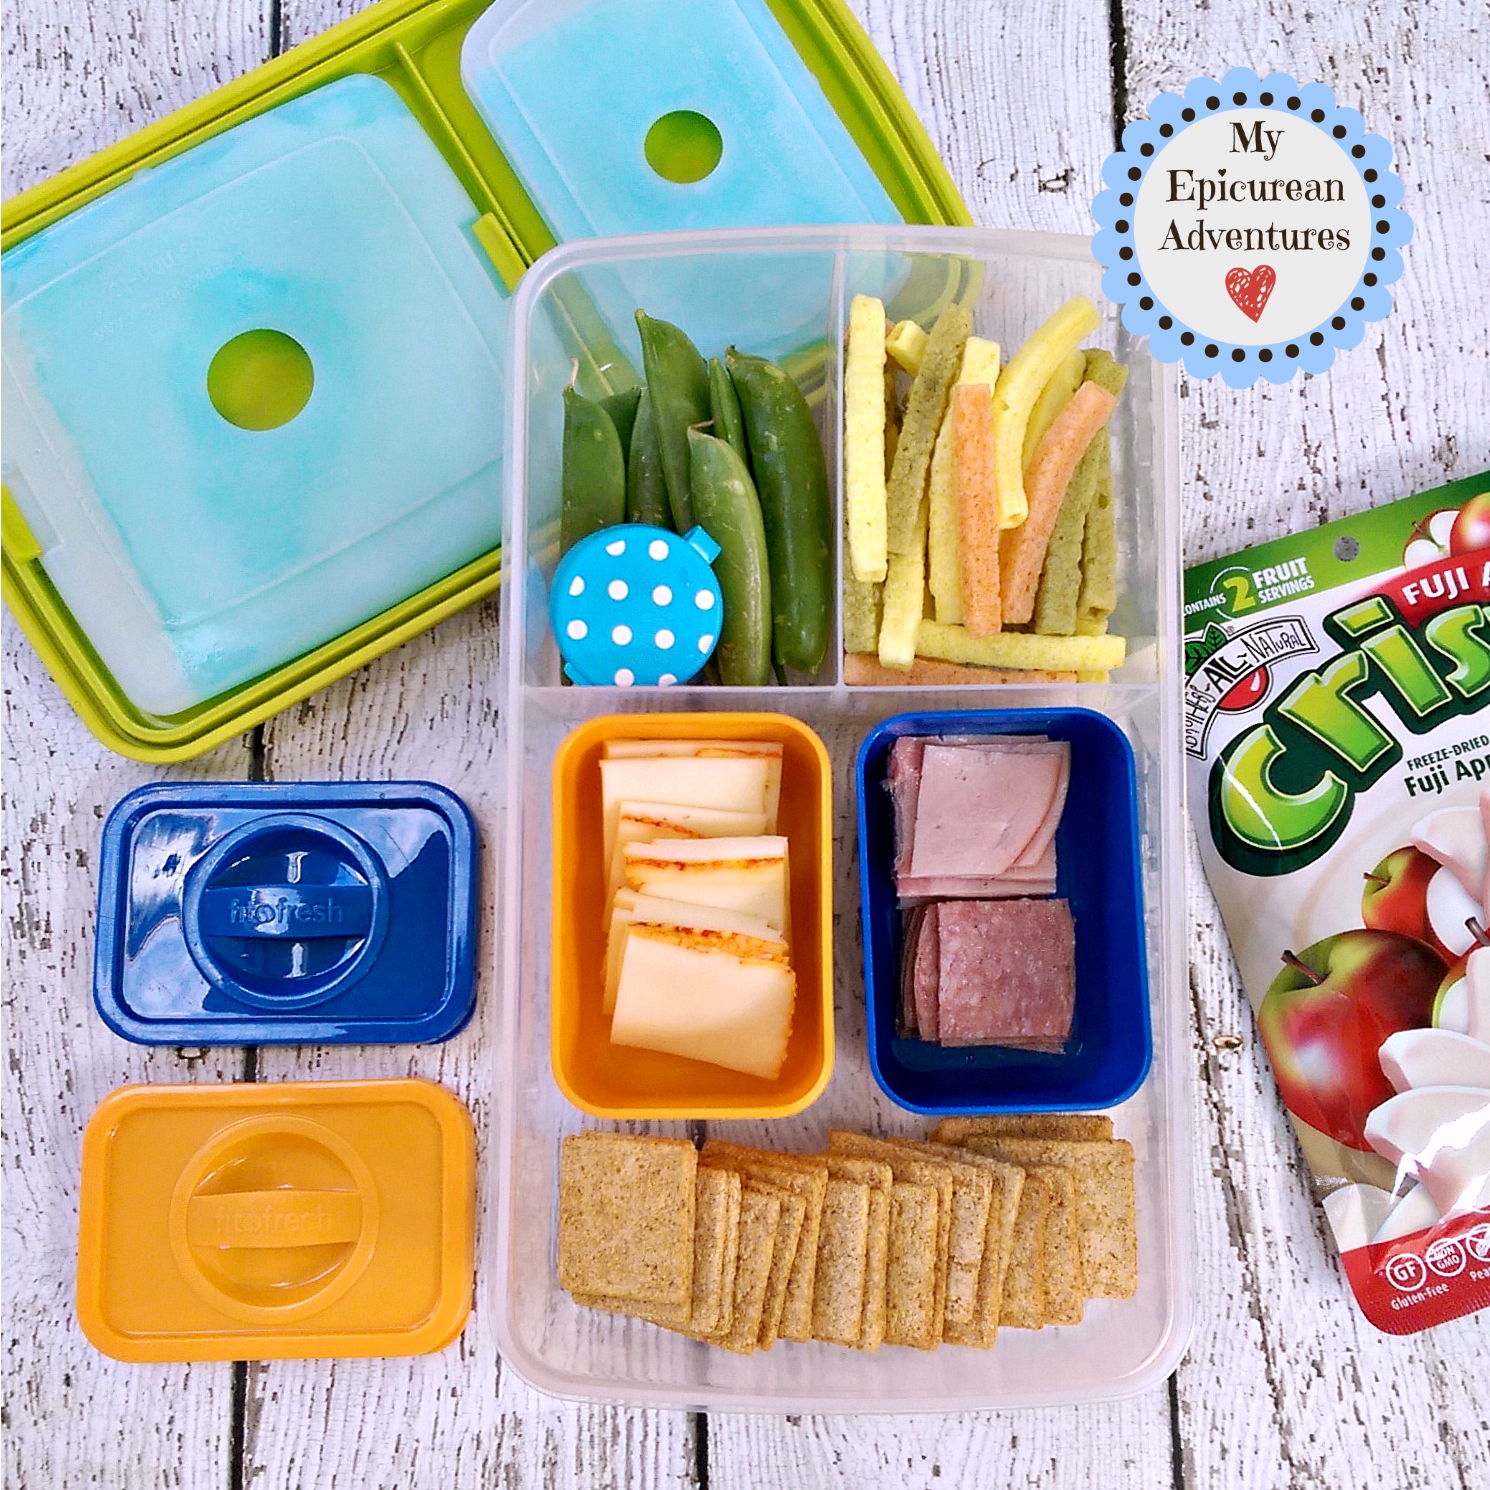 My Epicurean Adventures: Fit & Fresh Bento Kit Review and Giveaway